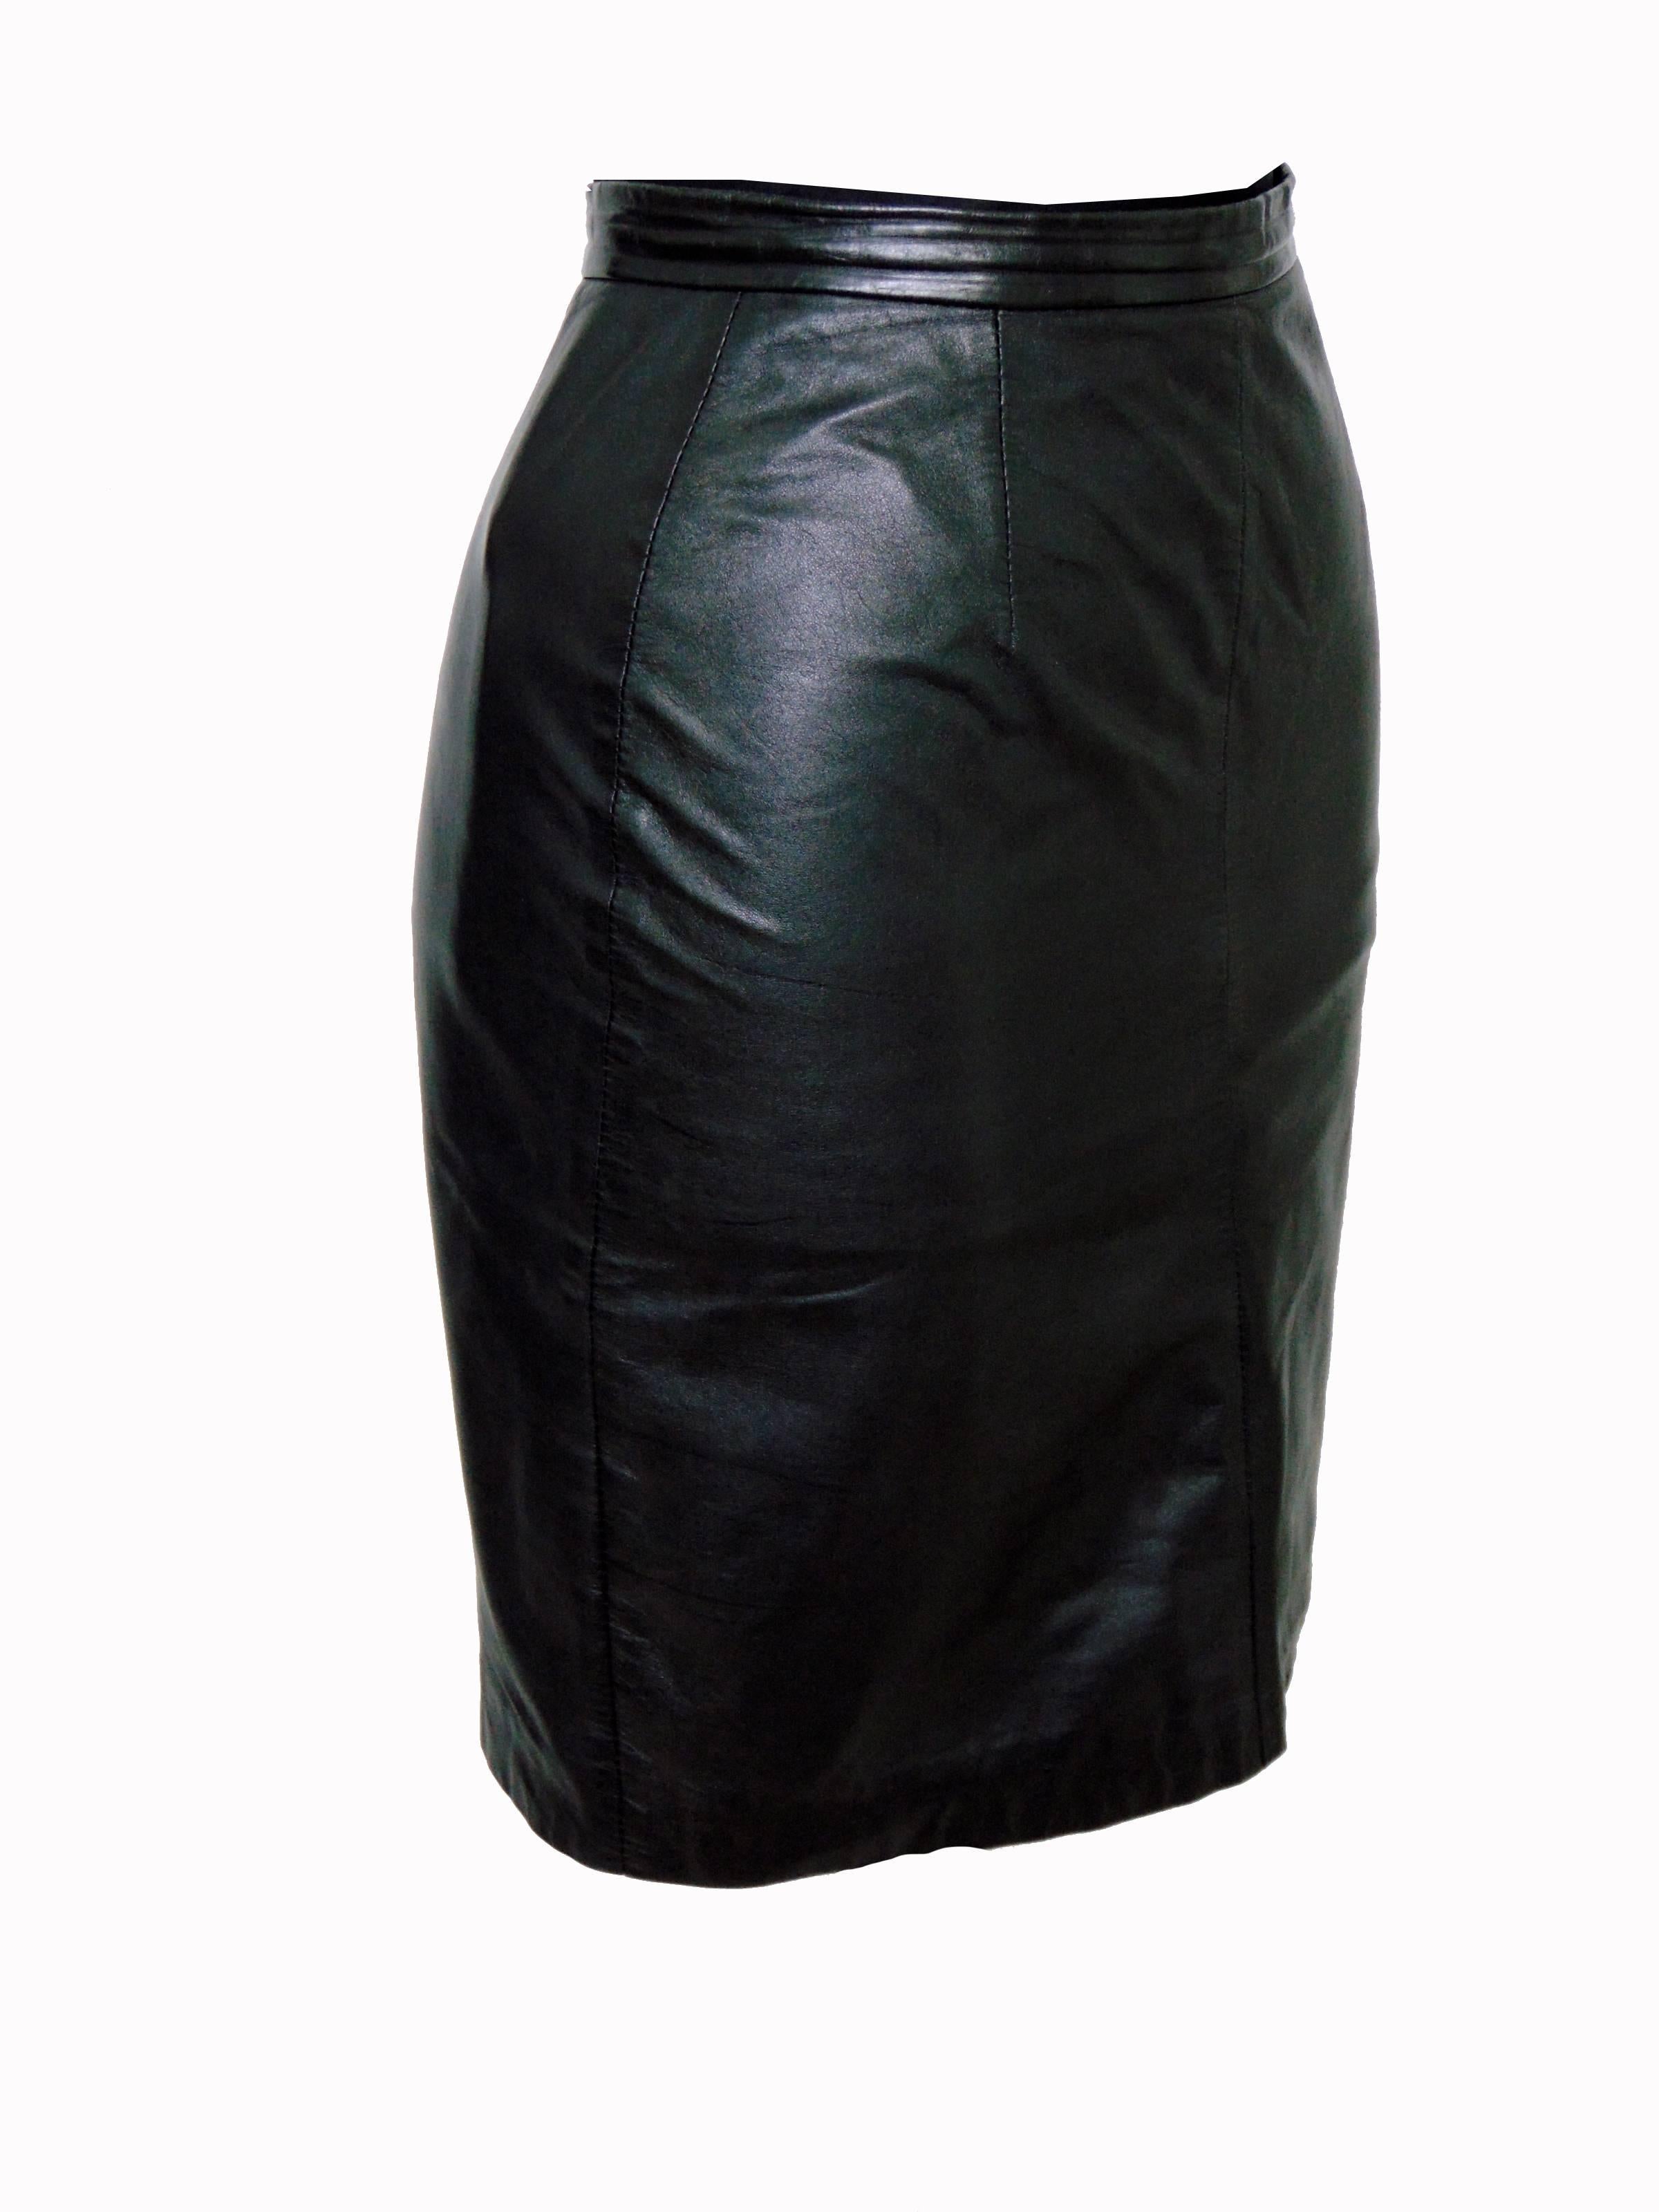 This chic little pencil skirt was made by Michael Hoban for North Beach Leather, most likely in the 1980s.  Fully-lined with a small rear vent and in very good condition overall, with minor signs of wear. Tagged size 3/4, this piece measures: waist